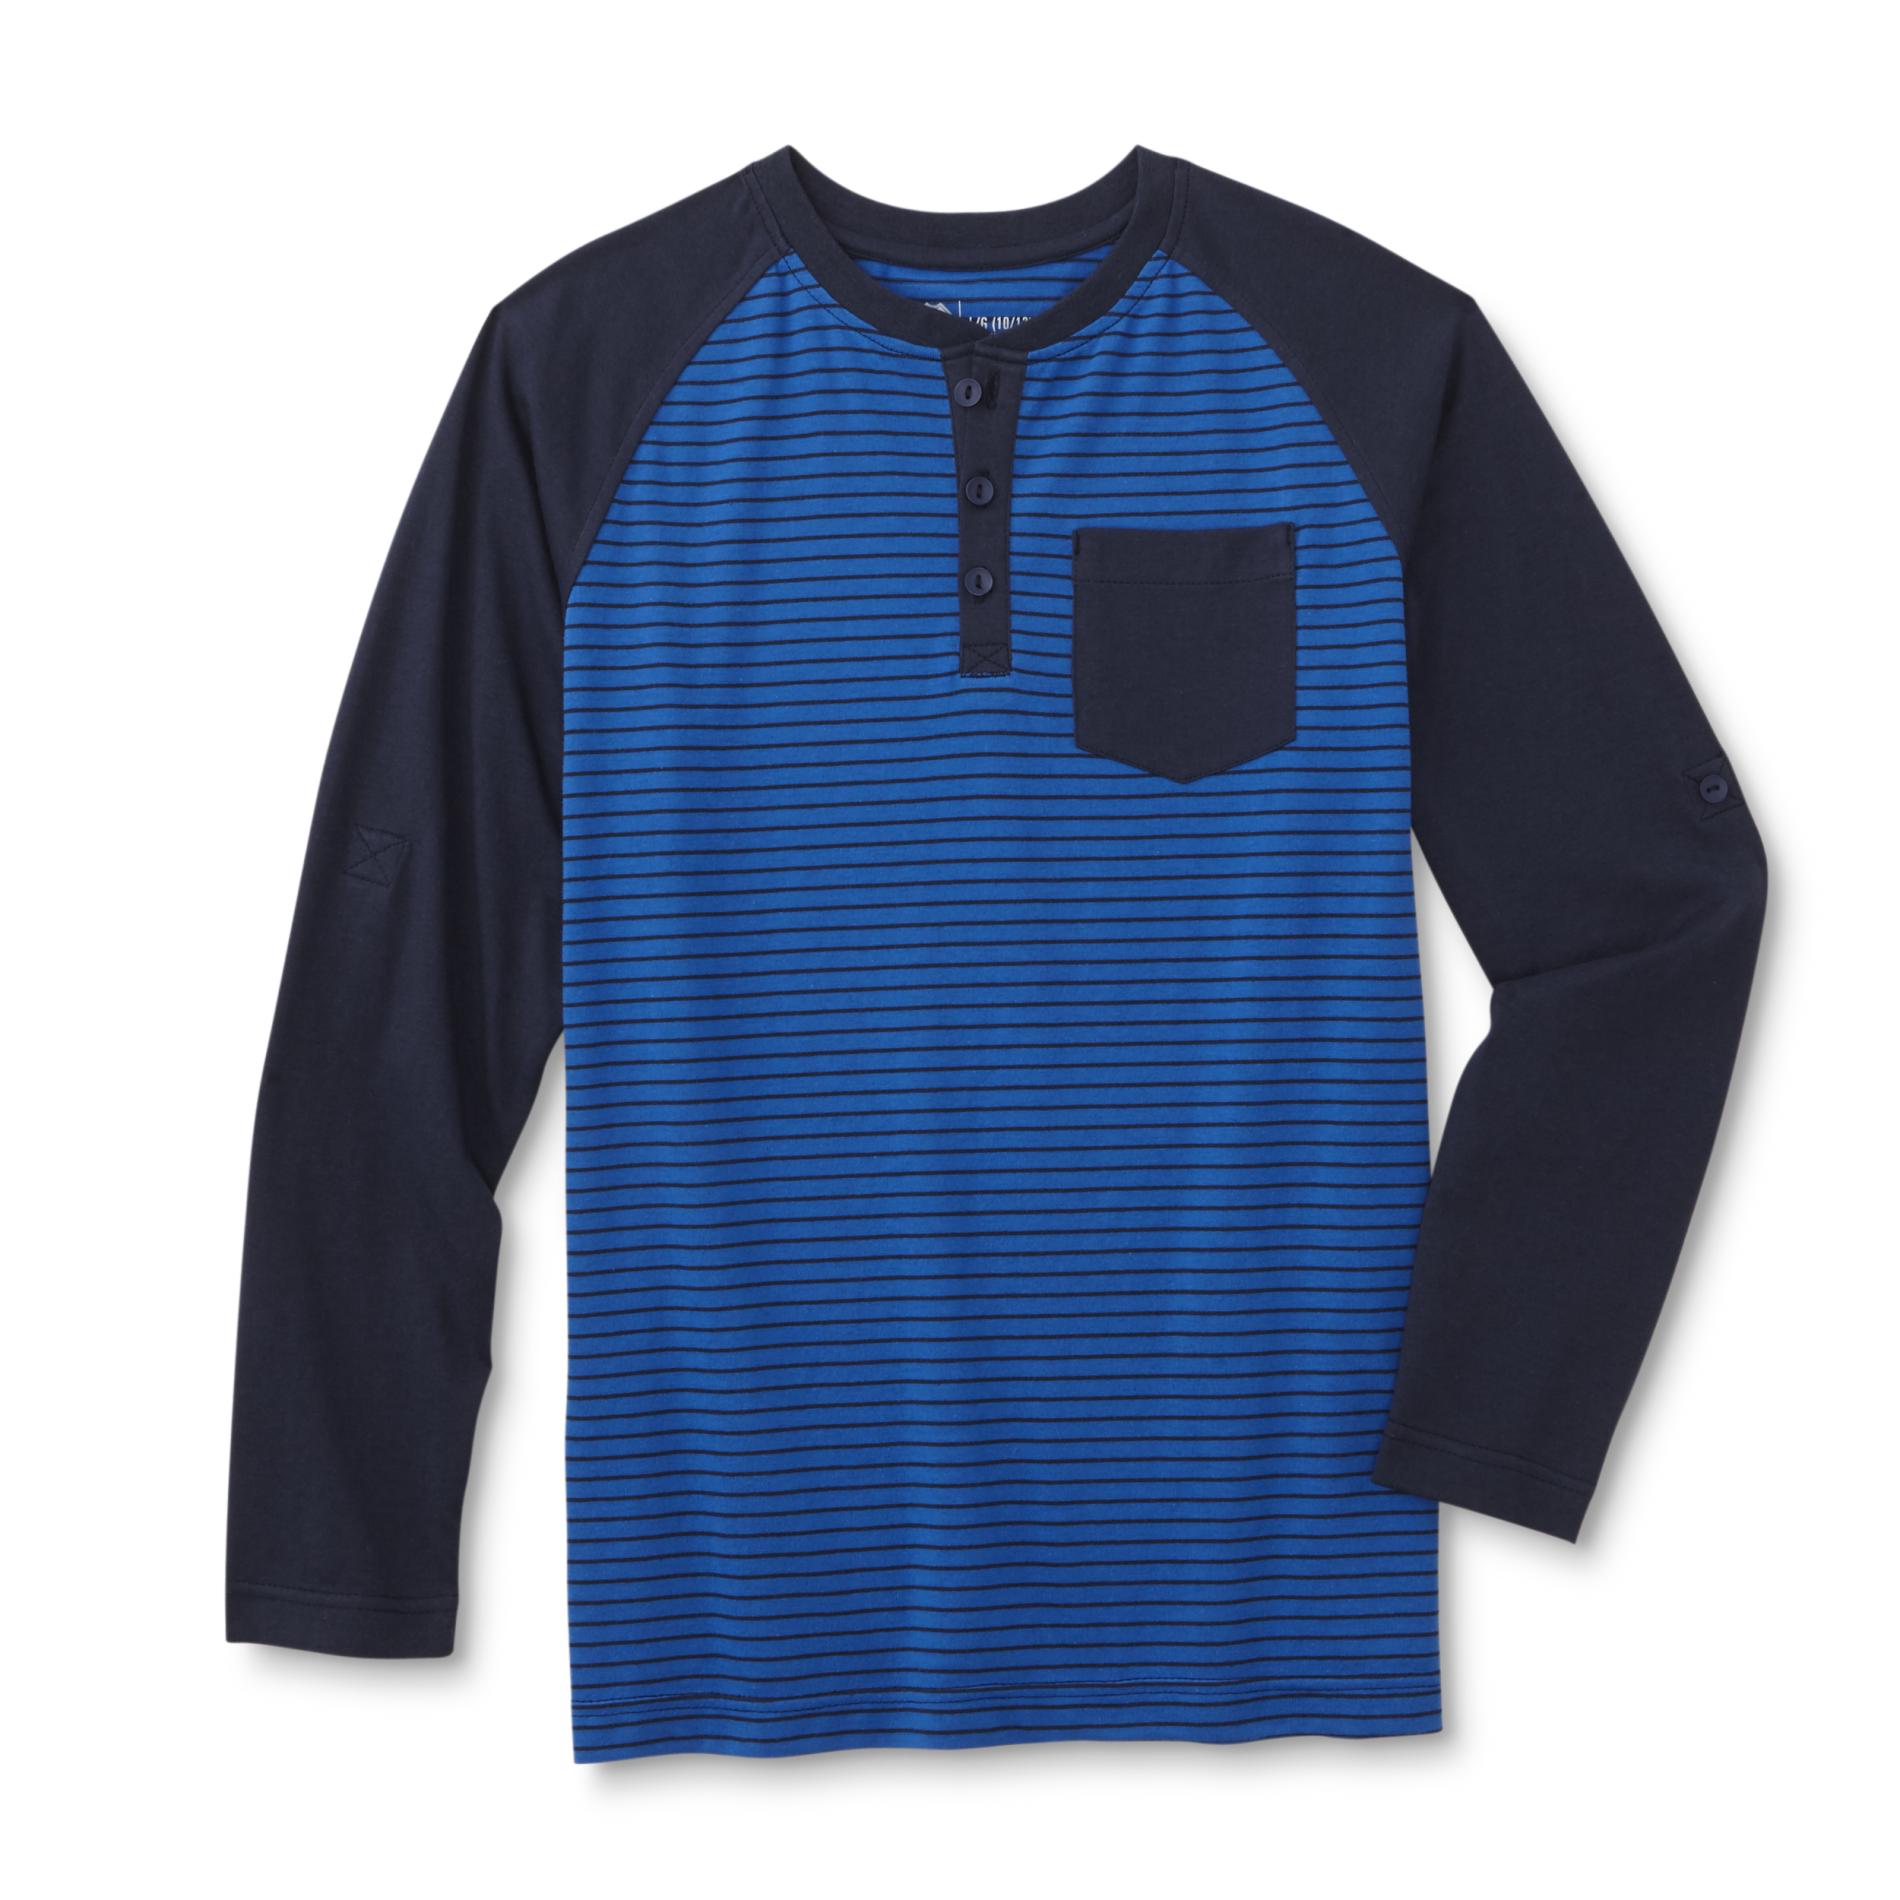 Route 66 Boys' Henley T-Shirt - Colorblock & Striped